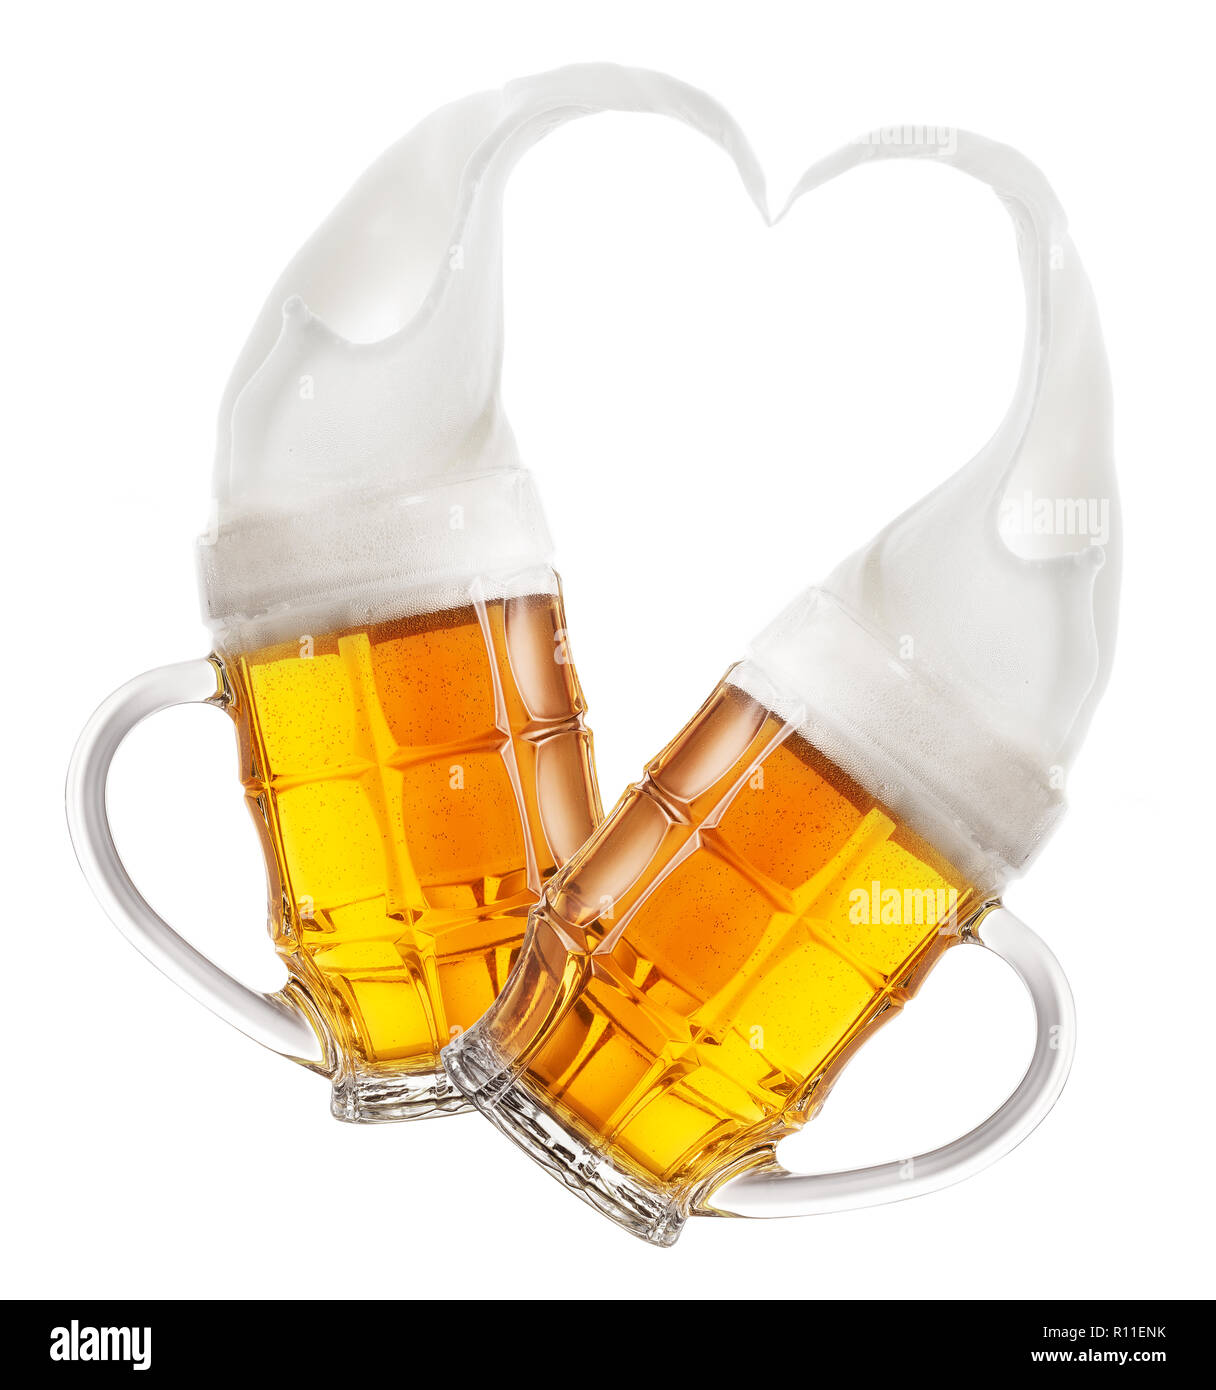 https://c8.alamy.com/comp/R11ENK/two-faceted-mugs-of-beer-with-splashes-of-foam-in-shape-of-heart-R11ENK.jpg